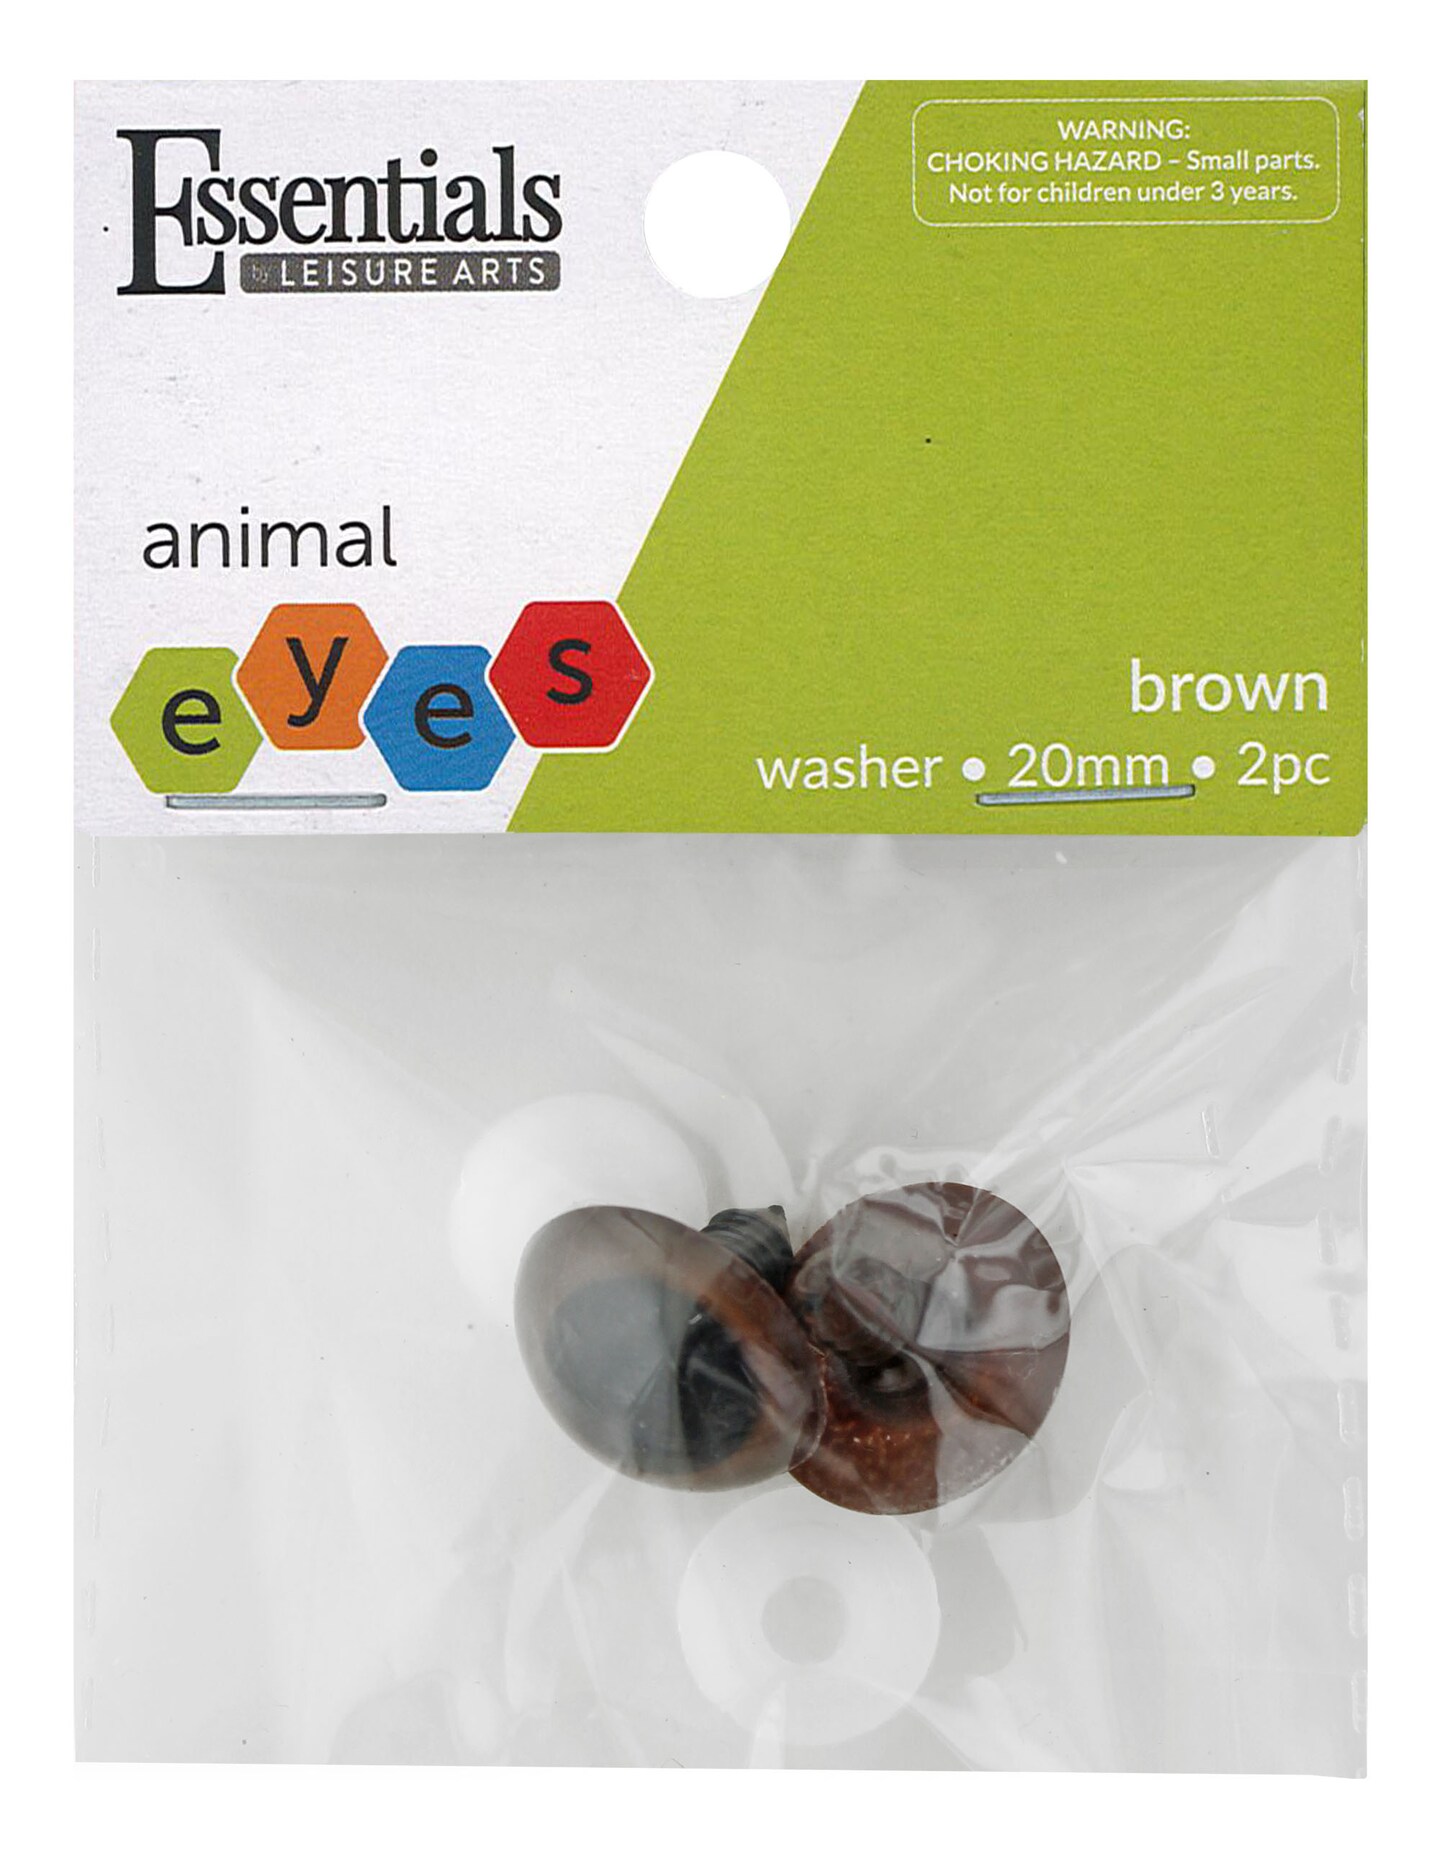 Essentials by Leisure Arts Eyes Solid with Washer Brown, 20mm, 2 pieces Googly Eyes, Google Eyes for Crafts, Big Googly Eyes for Crafts, Wiggle Eyes, Craft Eyes